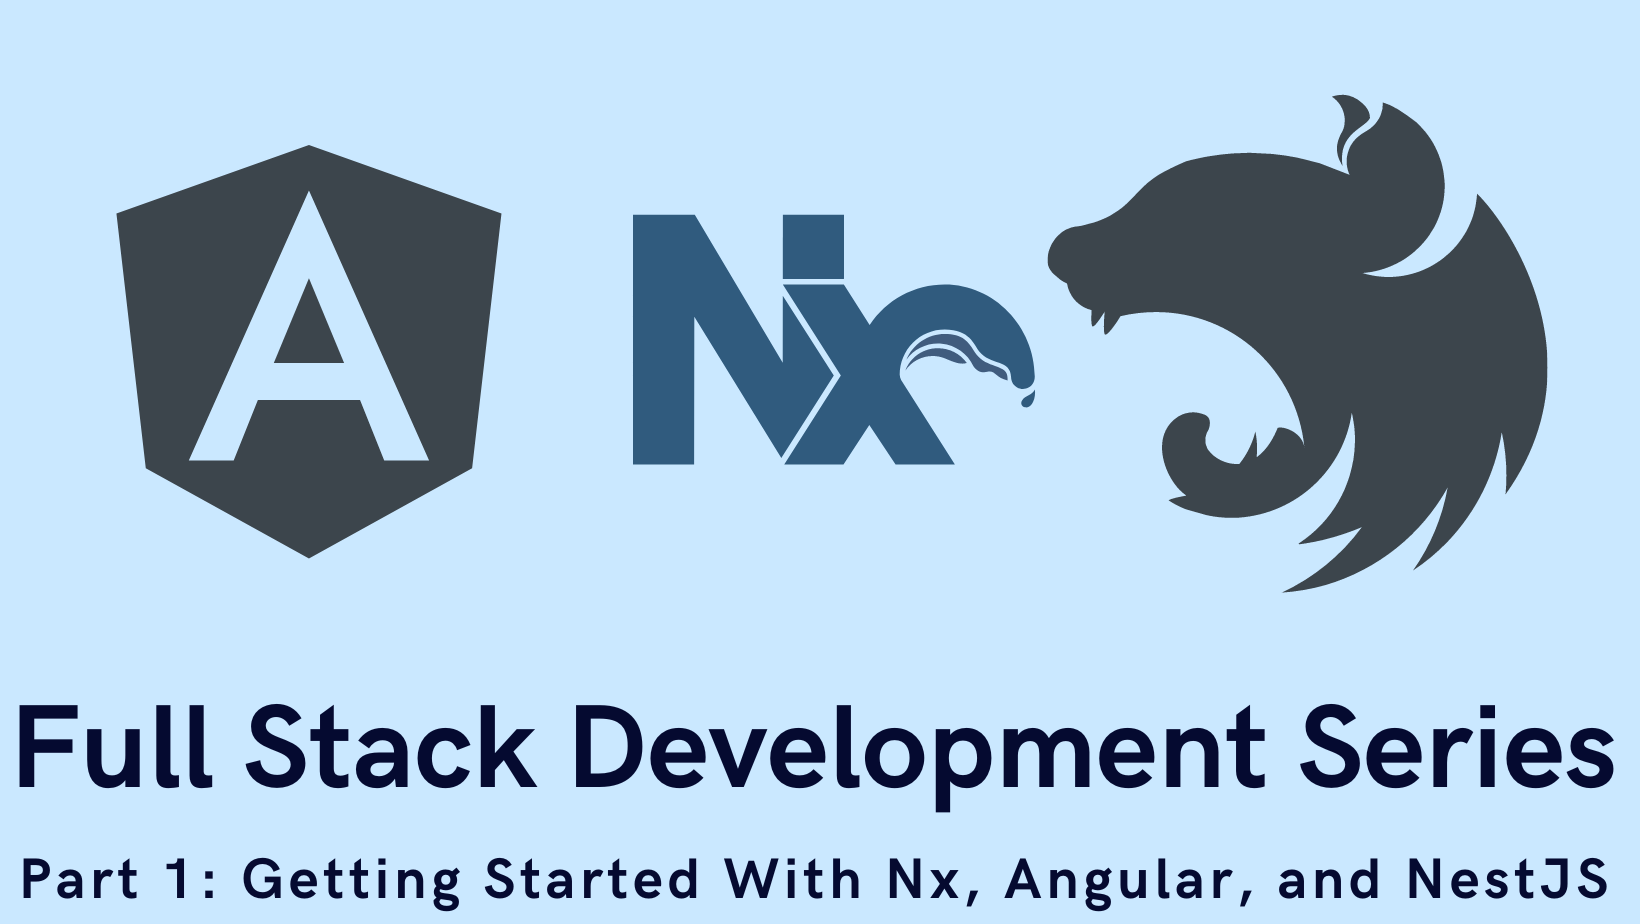 Full Stack Development Series Part 1: Getting Started with Nx, Angular, and NestJS